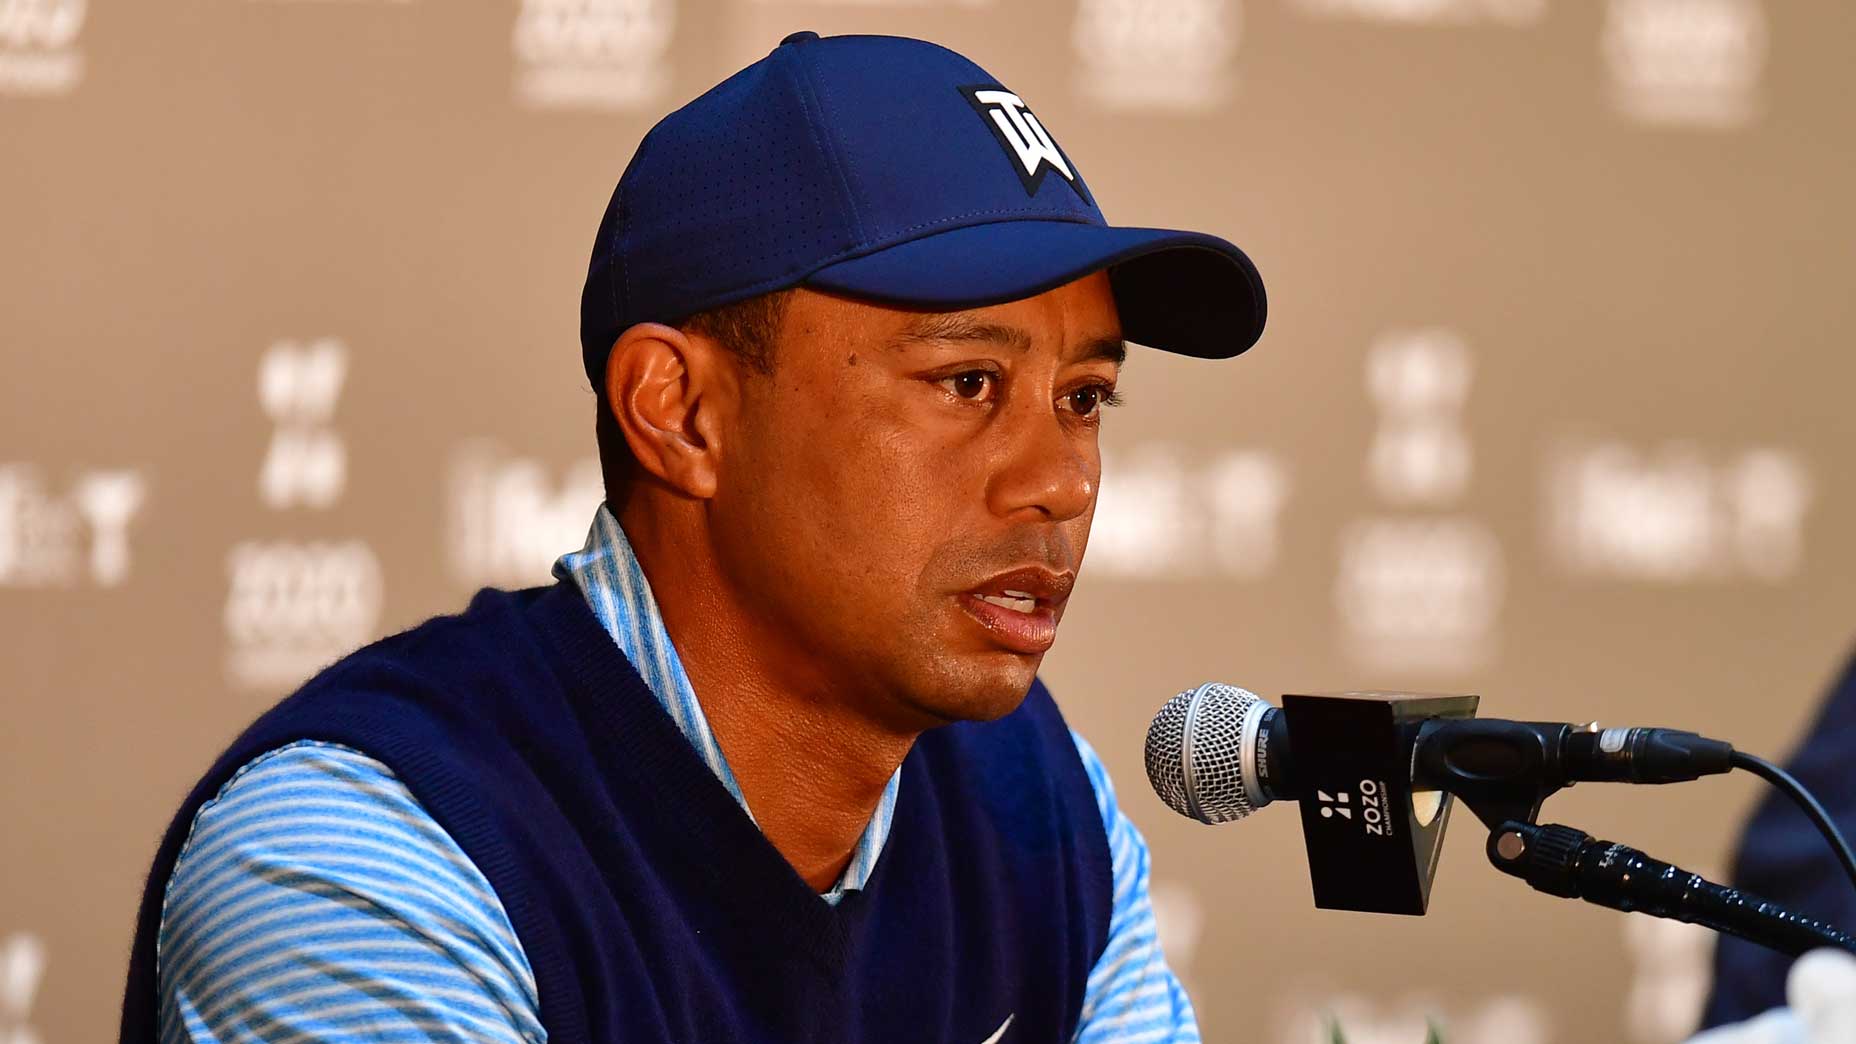 Tiger Woods To Hold Press Conference Tuesday For First Time Since Accident